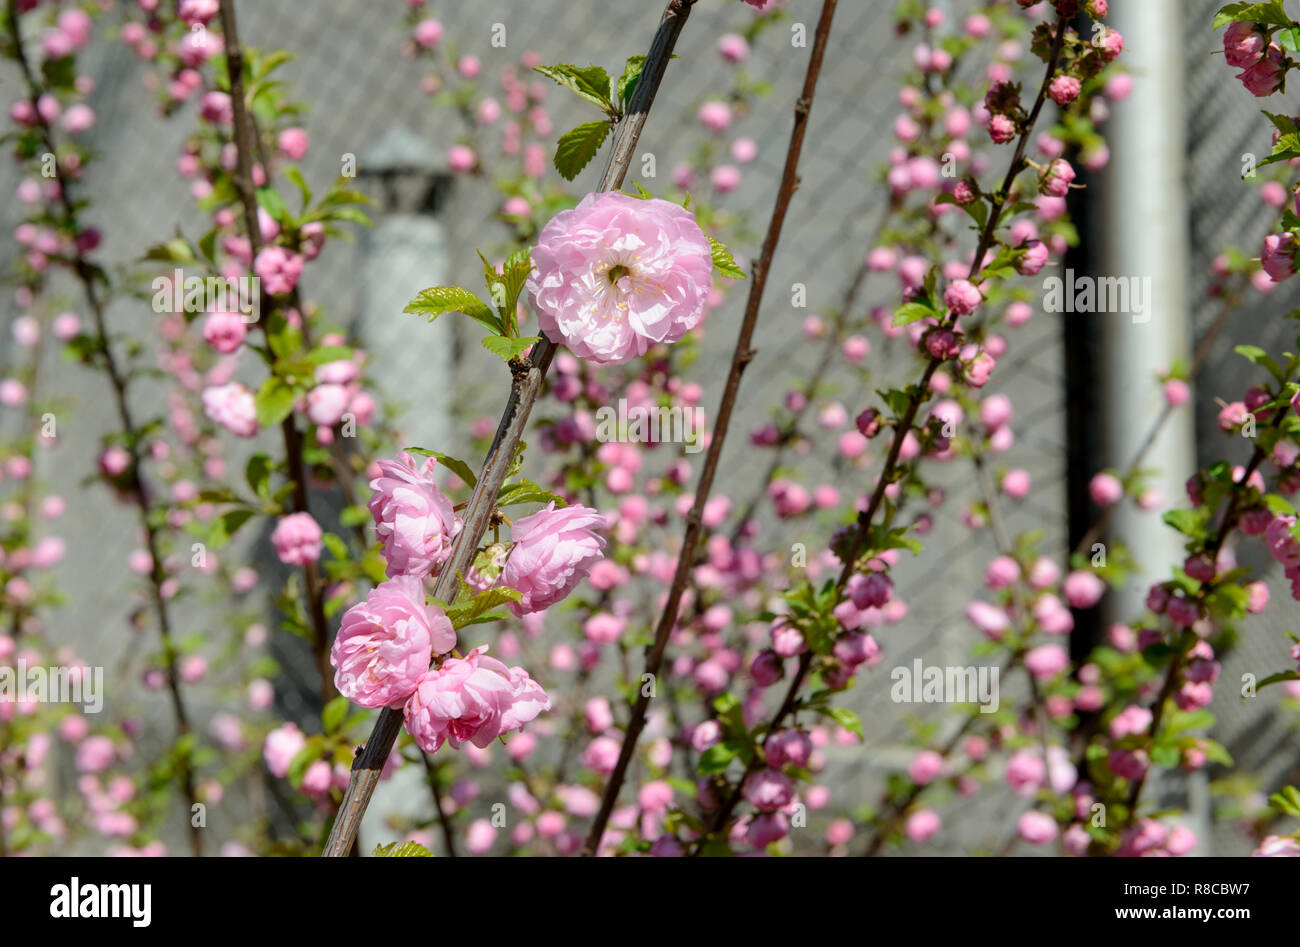 Many bright pink flowers that are starting bloom on twigs of  Prunus triloba bush in bright spring sunlight on gray background. Stock Photo